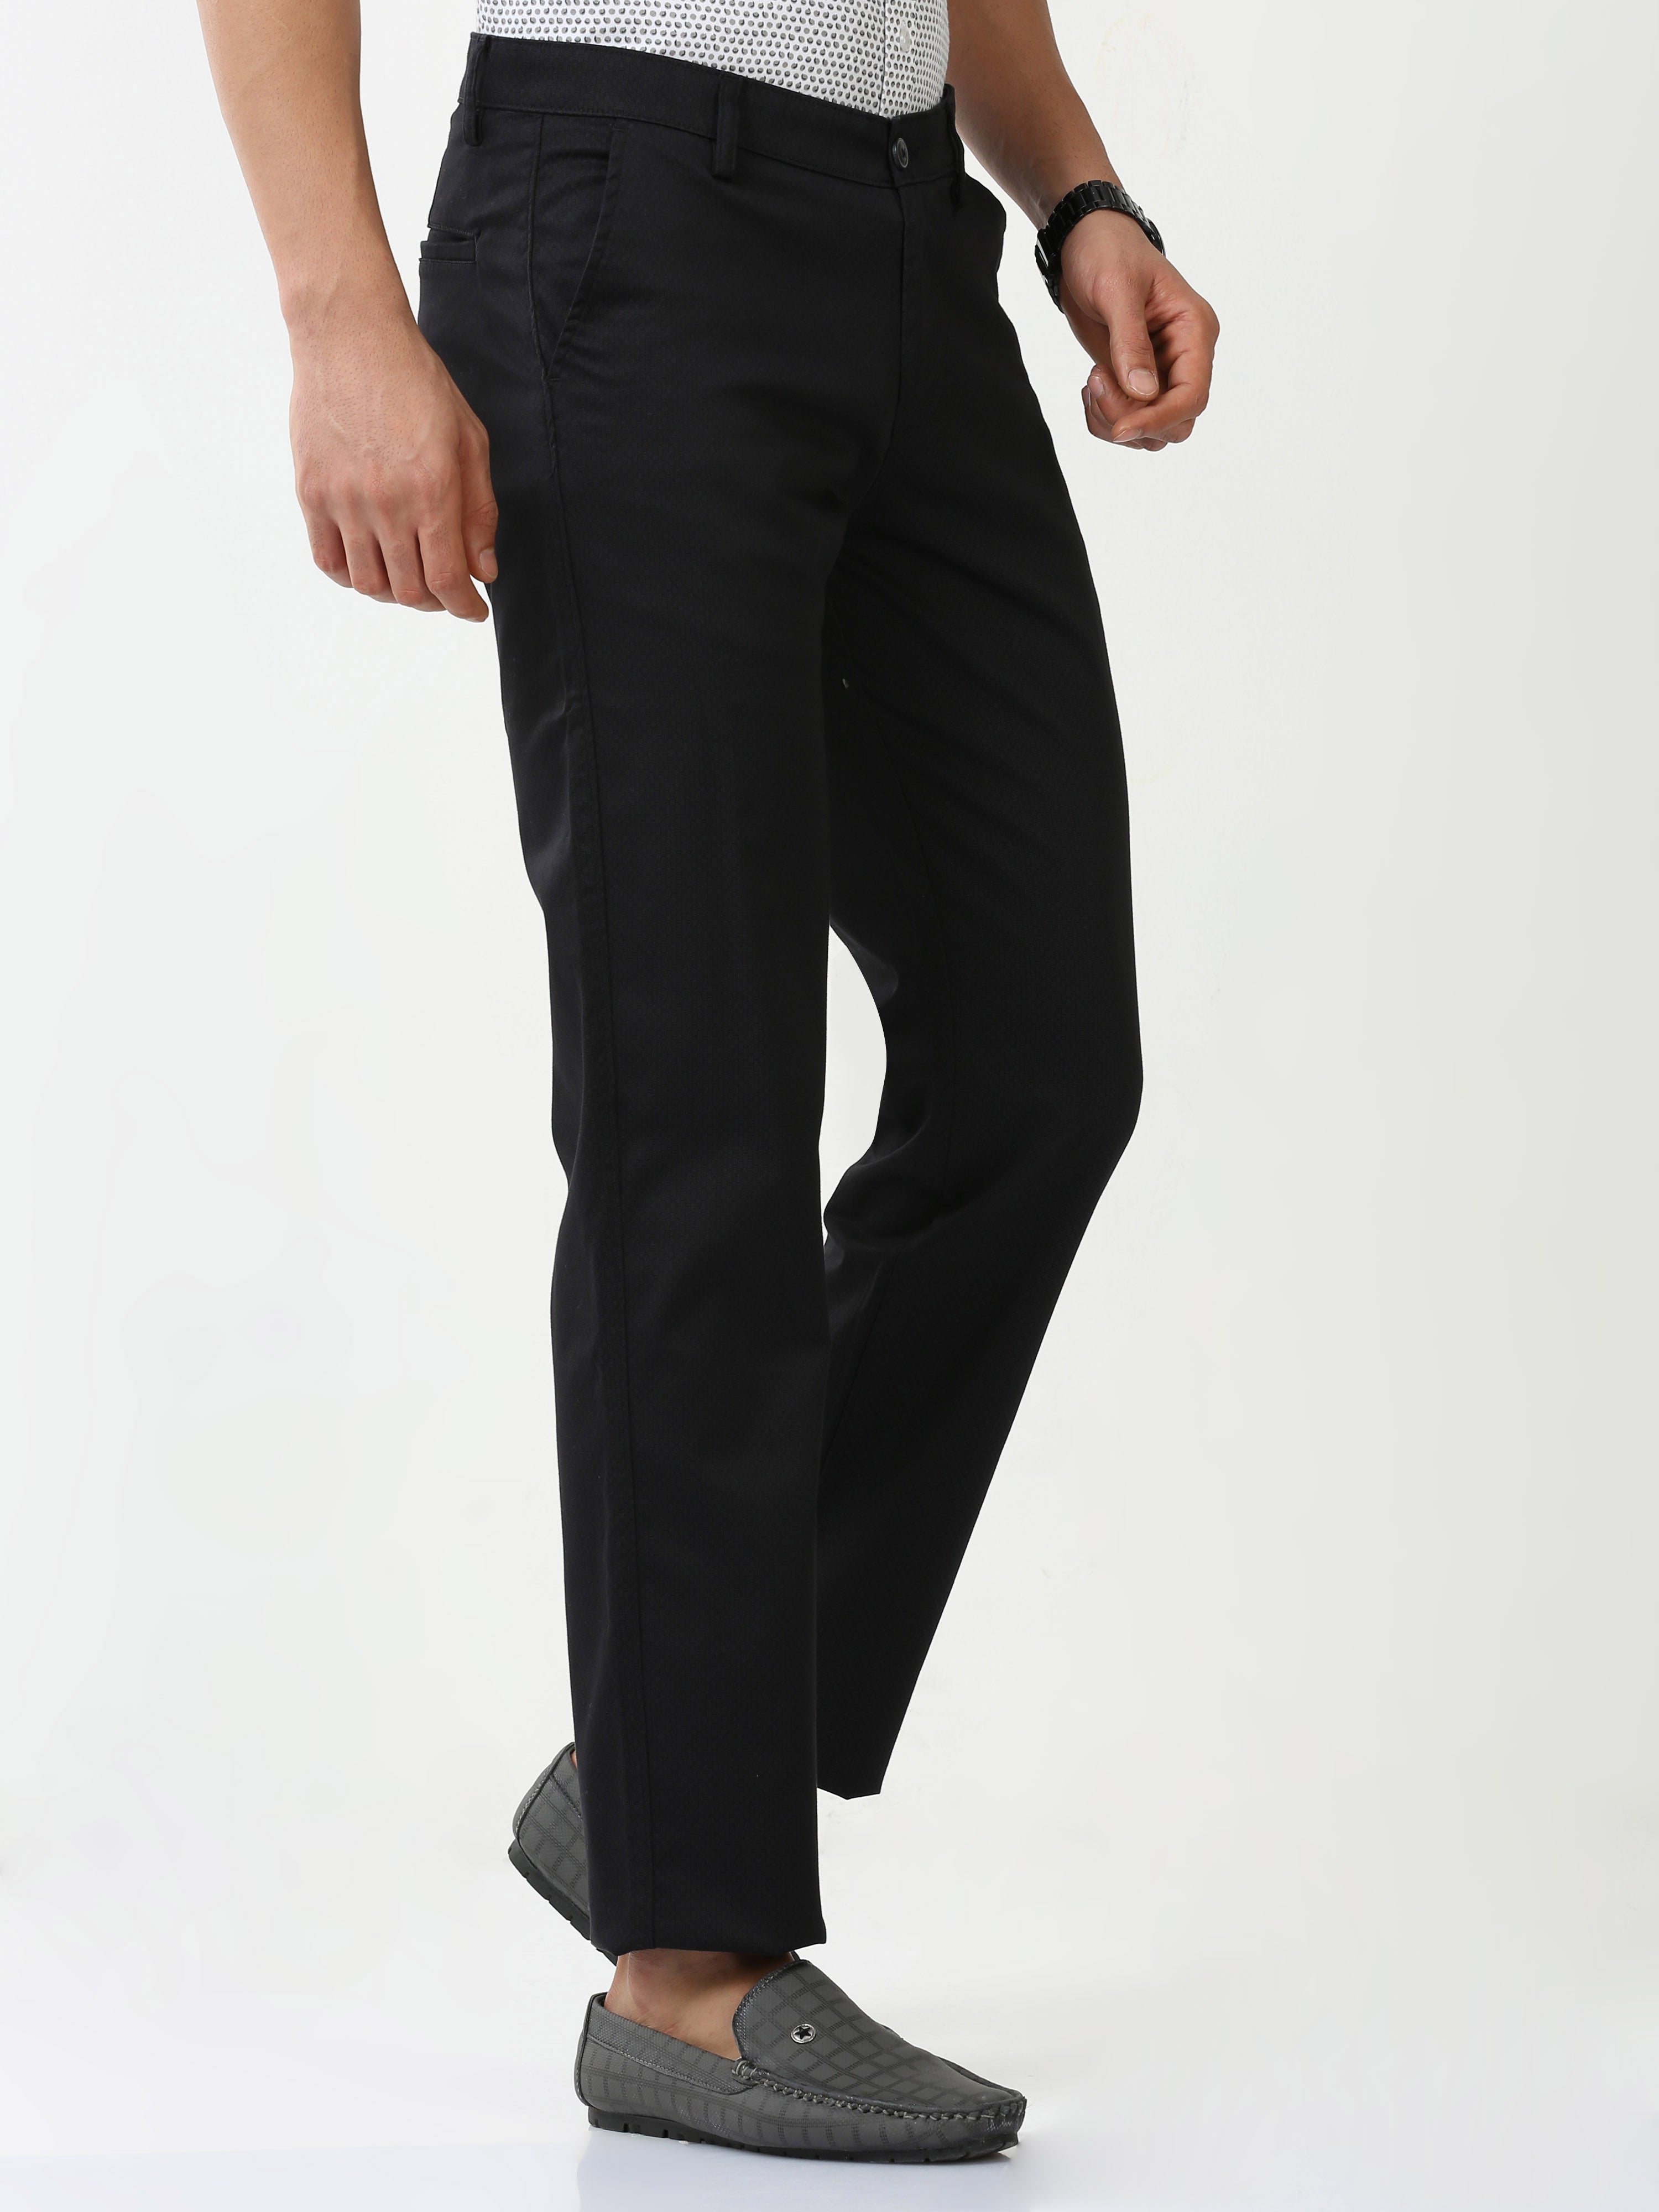 Allen Solly Black Cotton Printed Formal Trousers